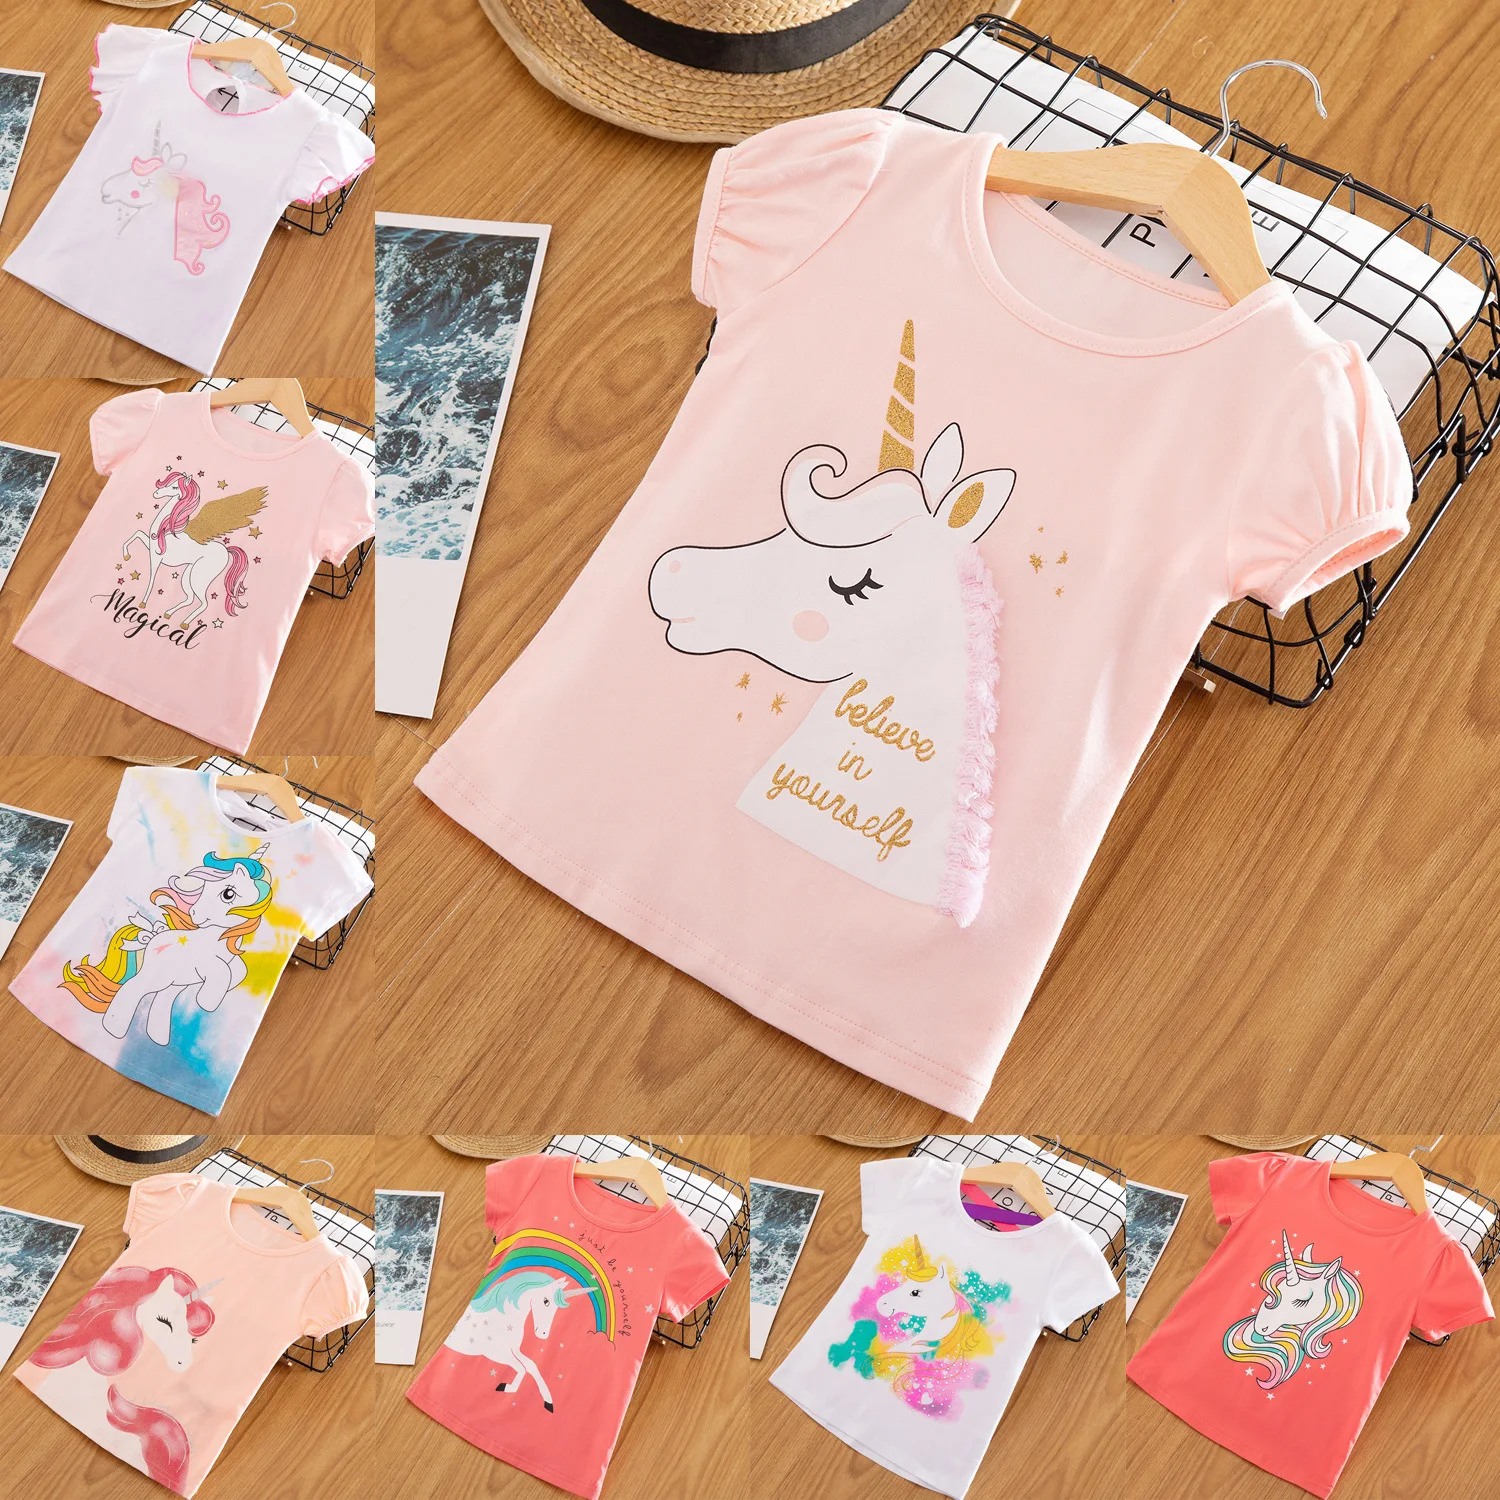 

kD-021 bulk instock wholesale high quality unicorn print shorts sleeve t shirts for baby girls summer tops cotton knitted shirt, Multicolor as picture show